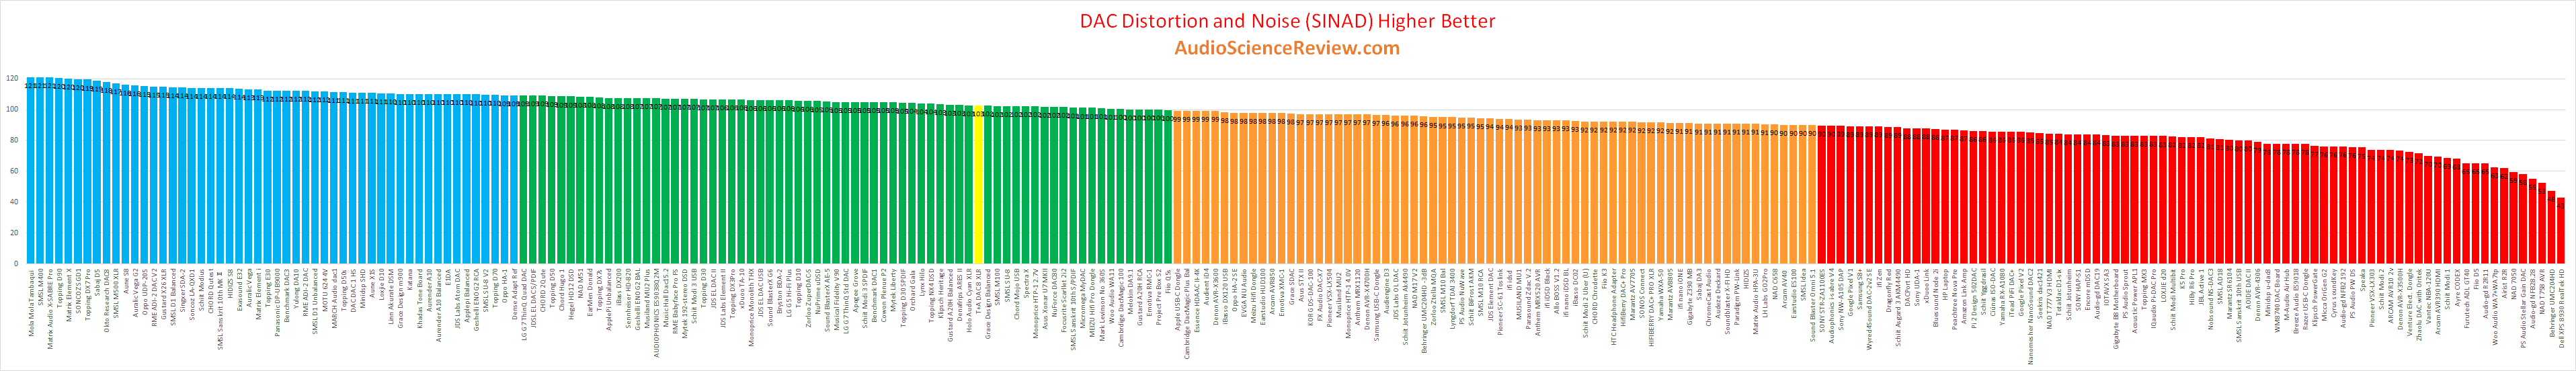 Best balanced dac review measurements 2020.png